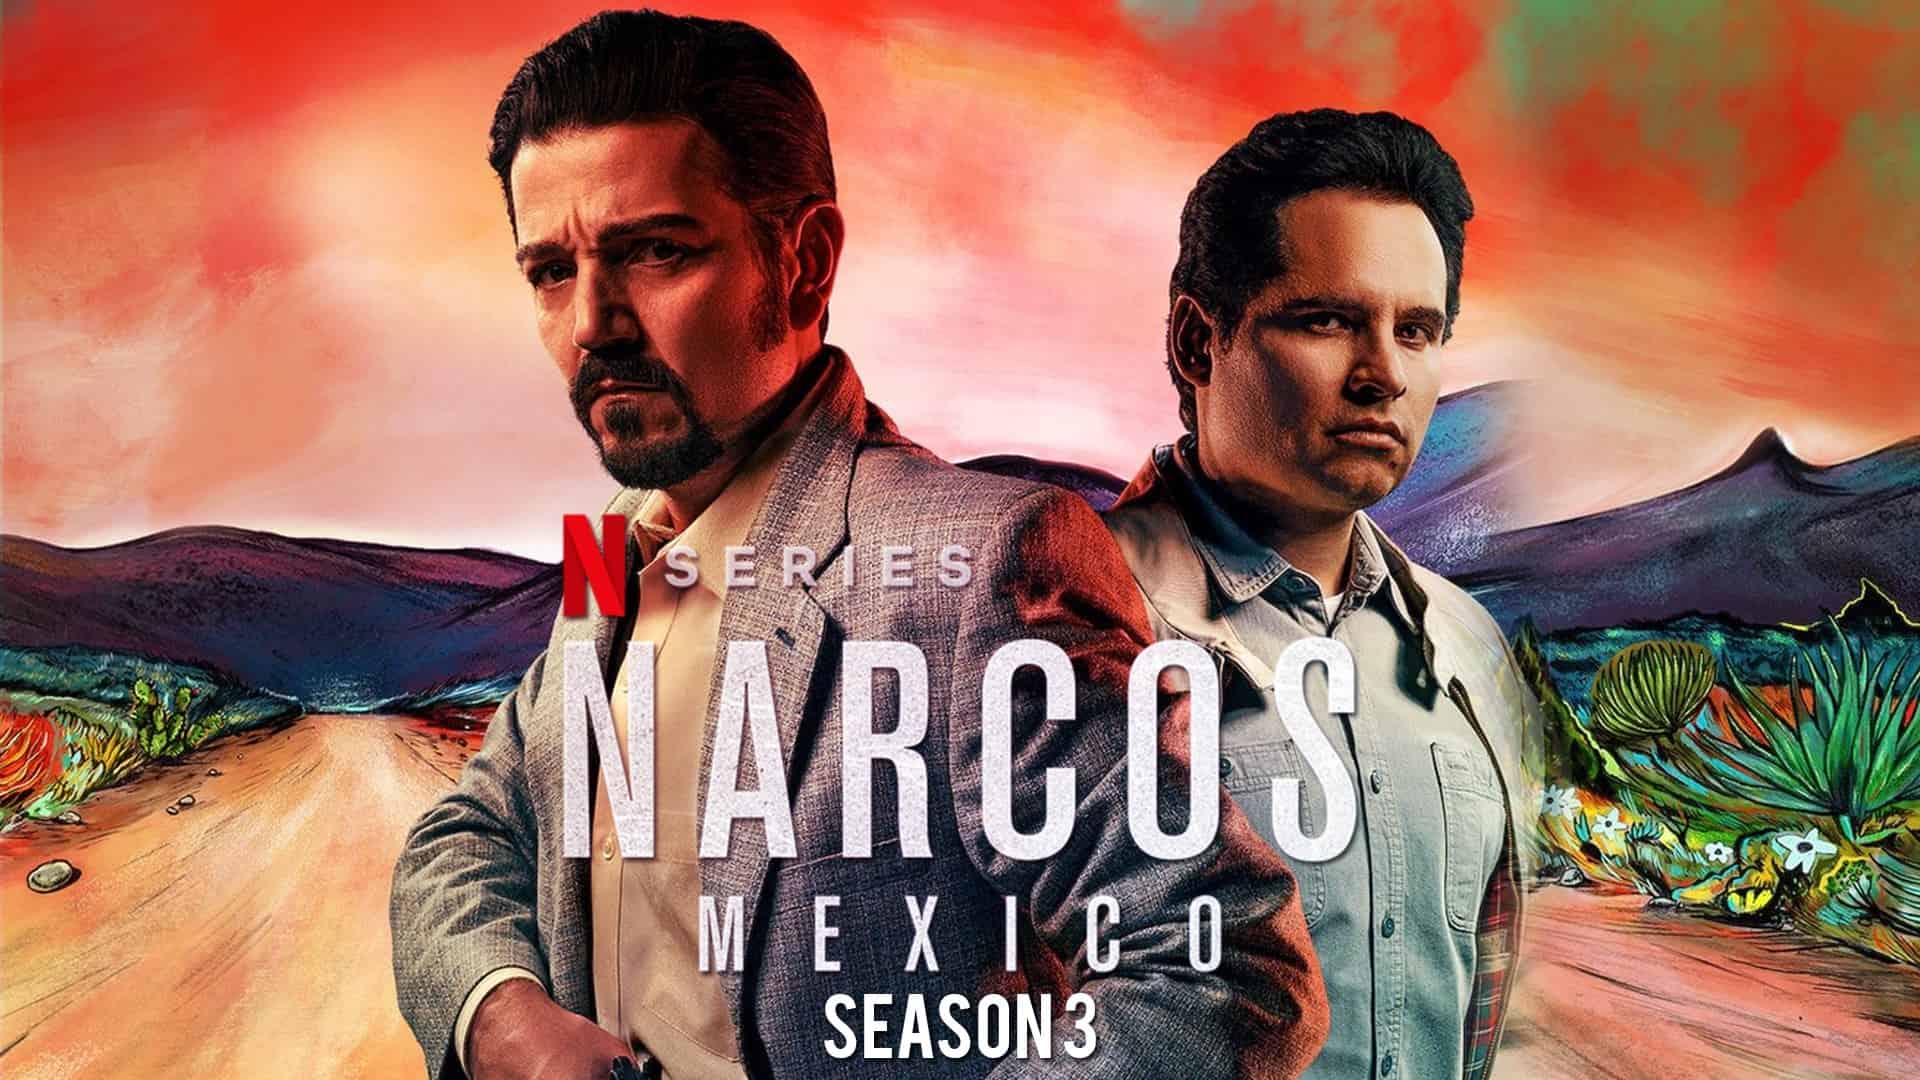 Things to know about Season 3 Narcos: Mexico